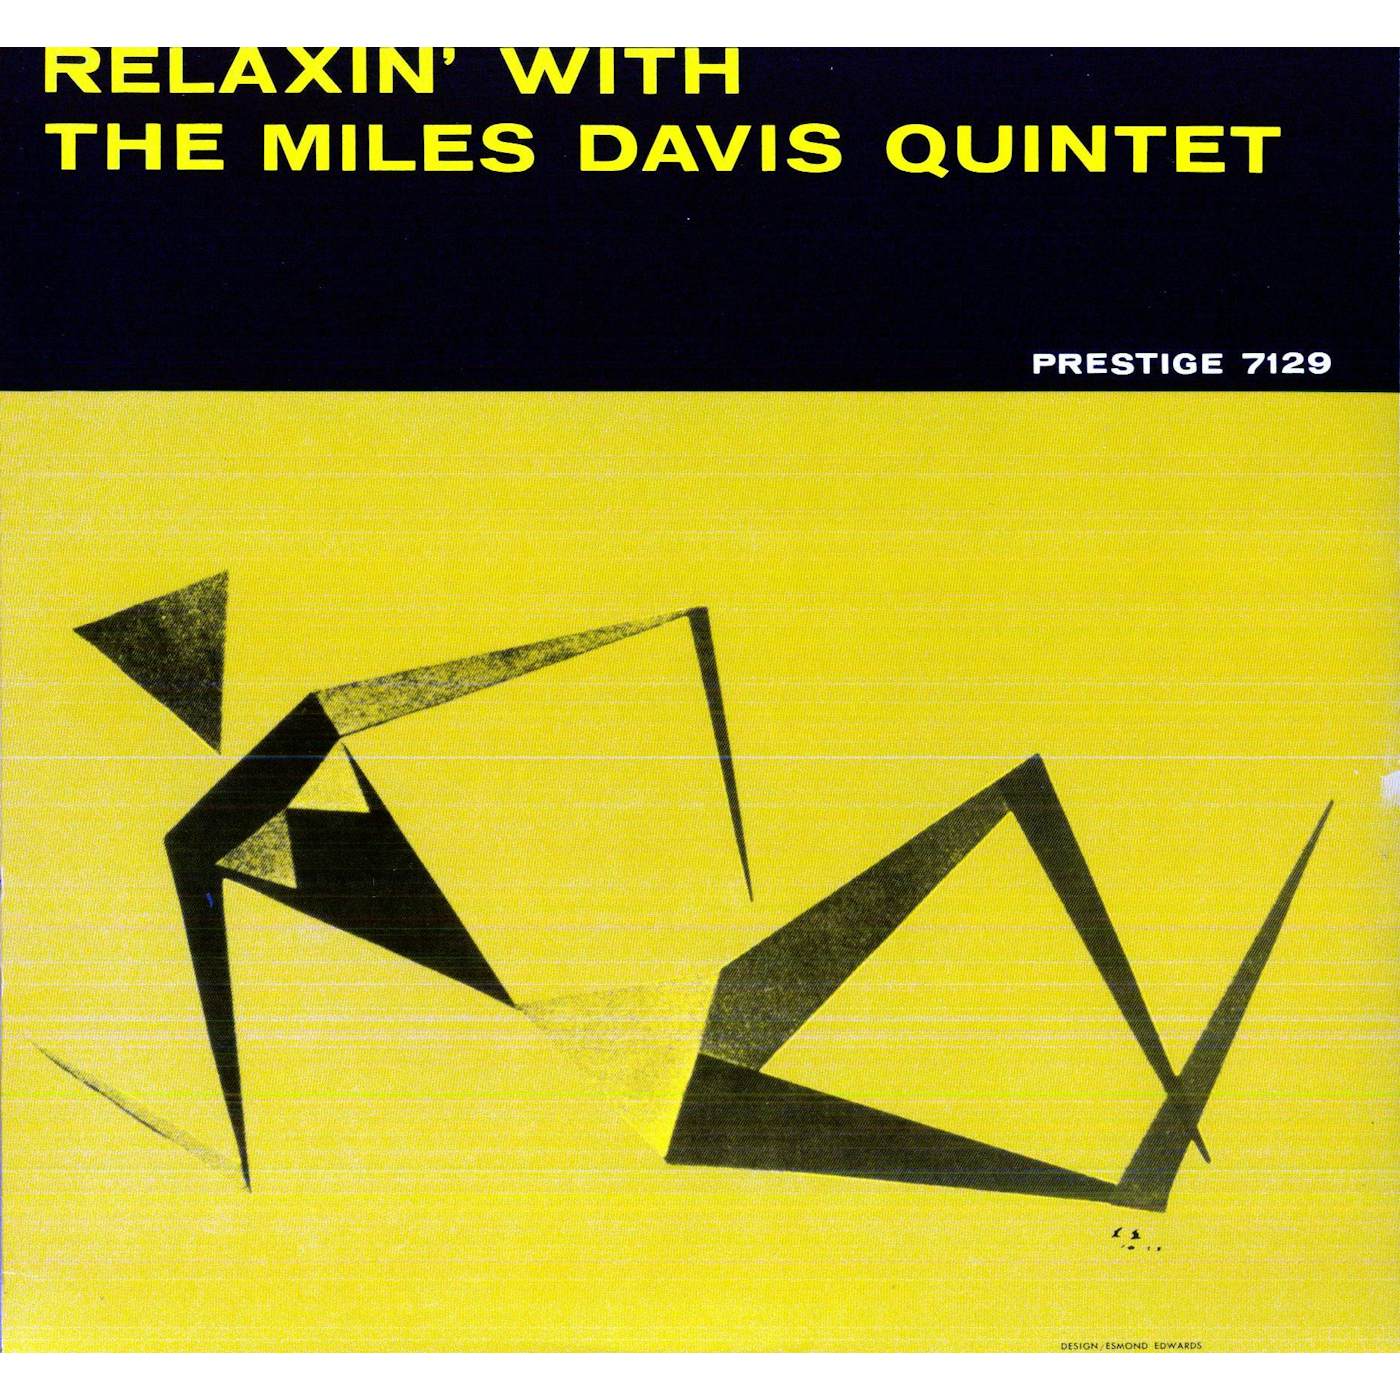 RELAXIN WITH THE MILES DAVIS QUINTET Vinyl Record